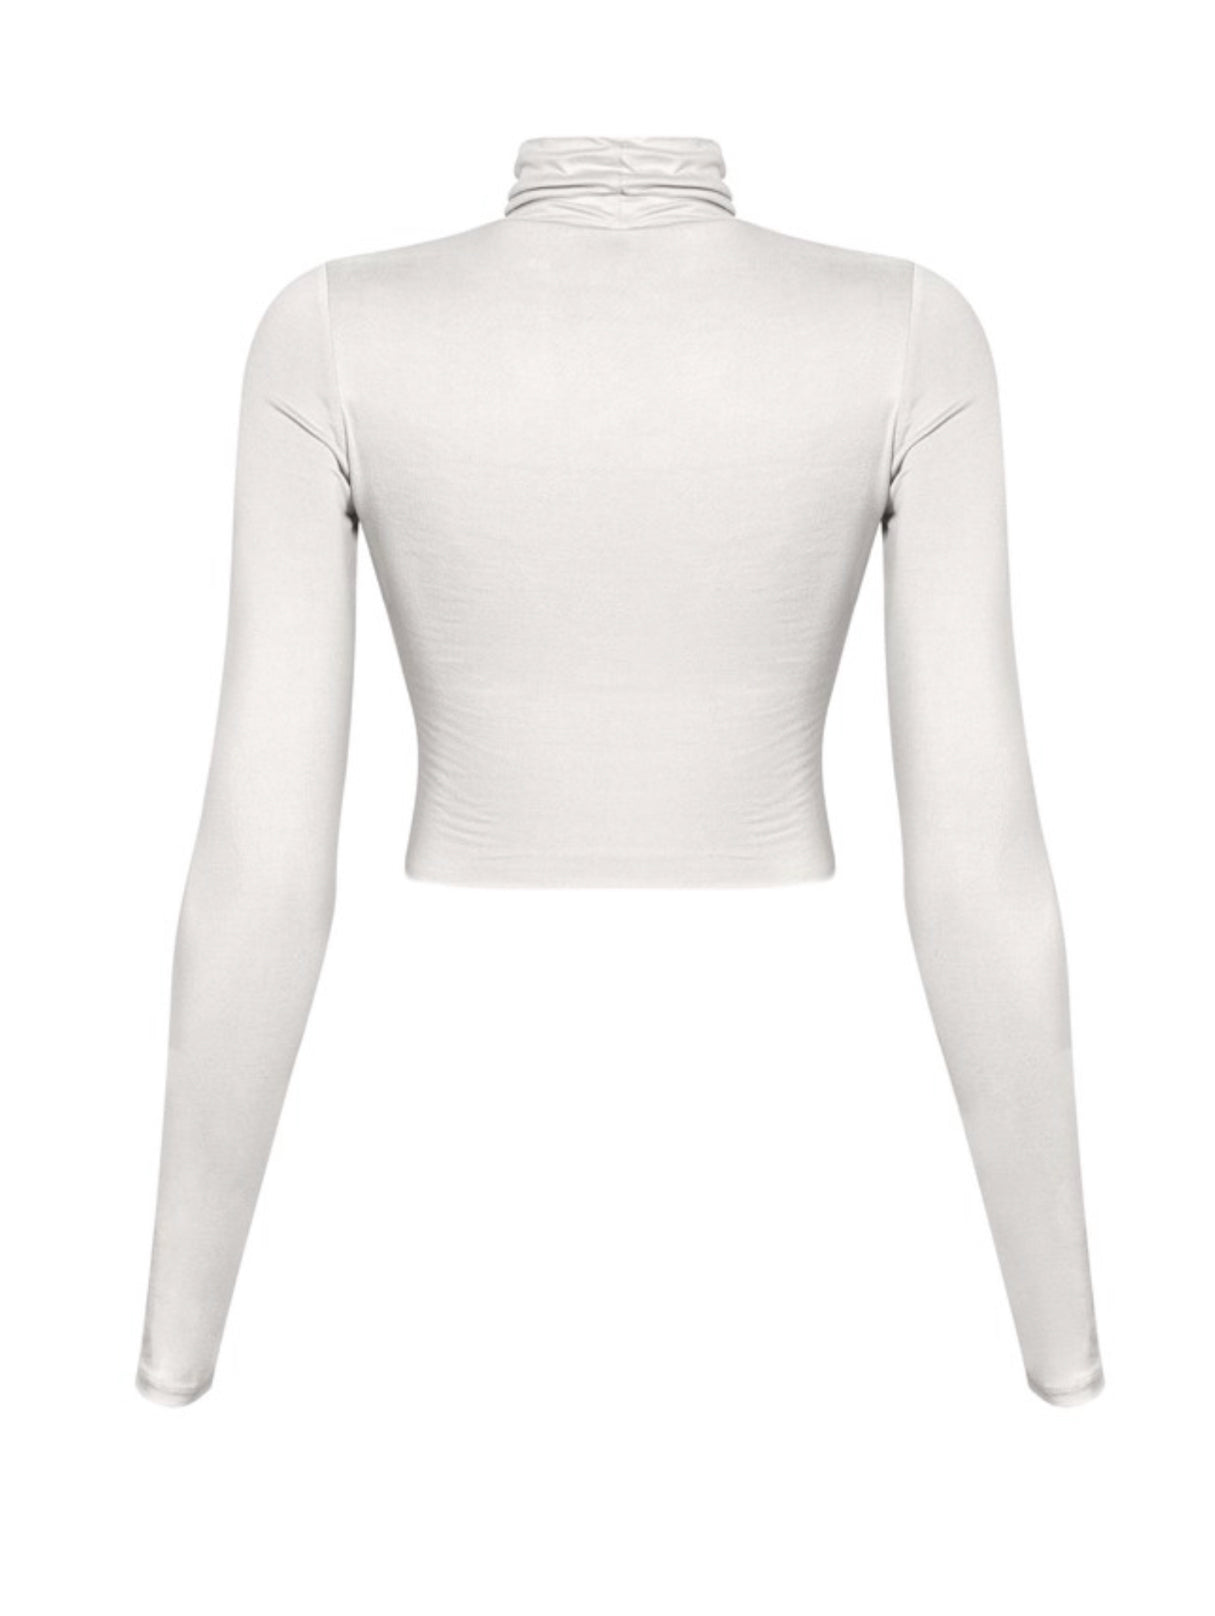 Rese Top - White – Miss Luxor